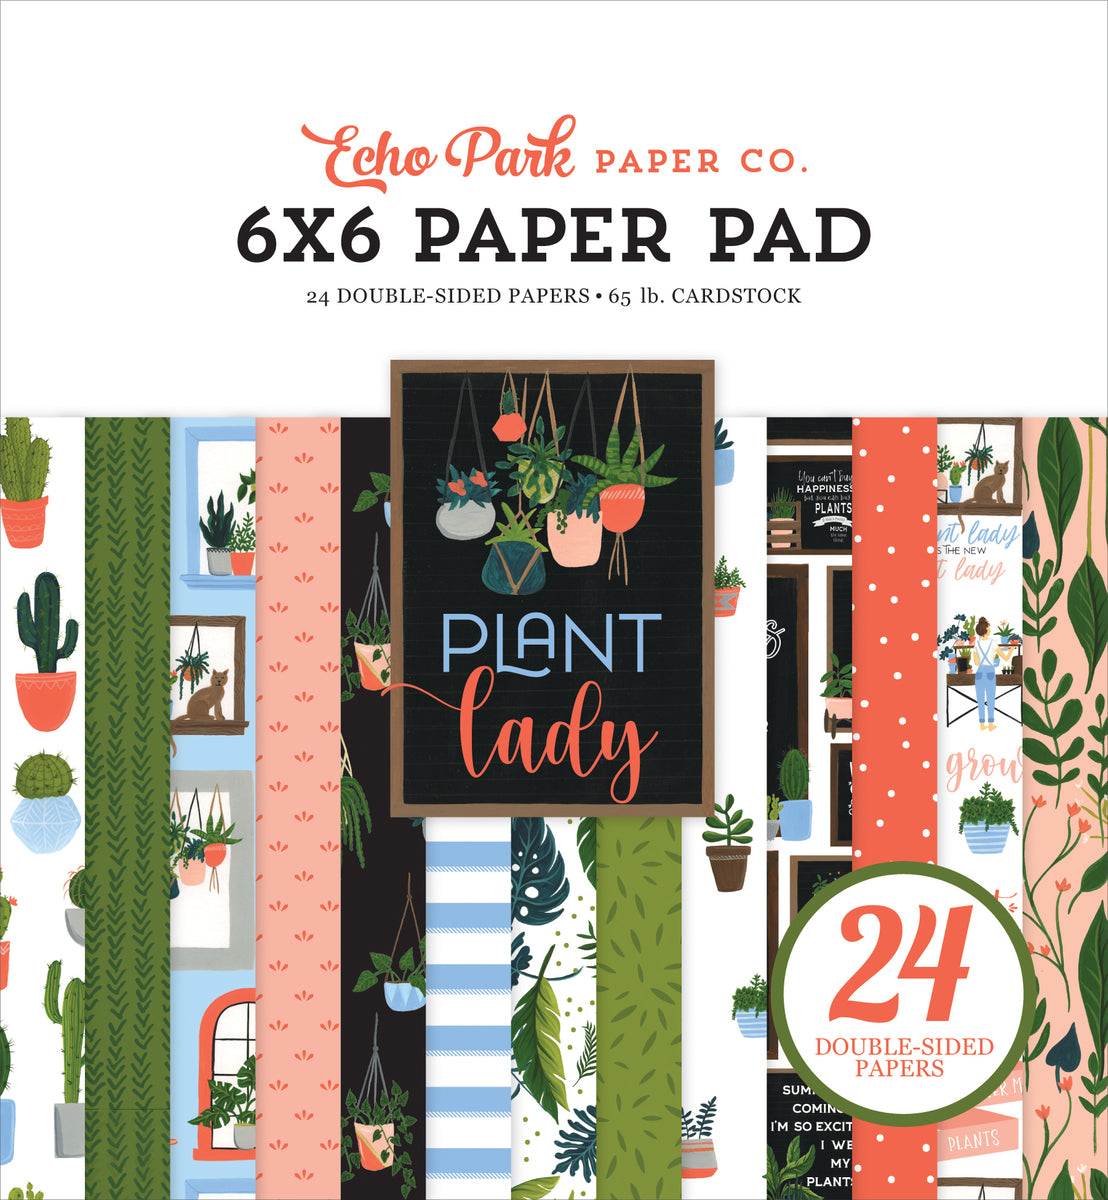 Plant Lady - 6x6 paper pad with 24 double-sided sheets - Echo Park Paper